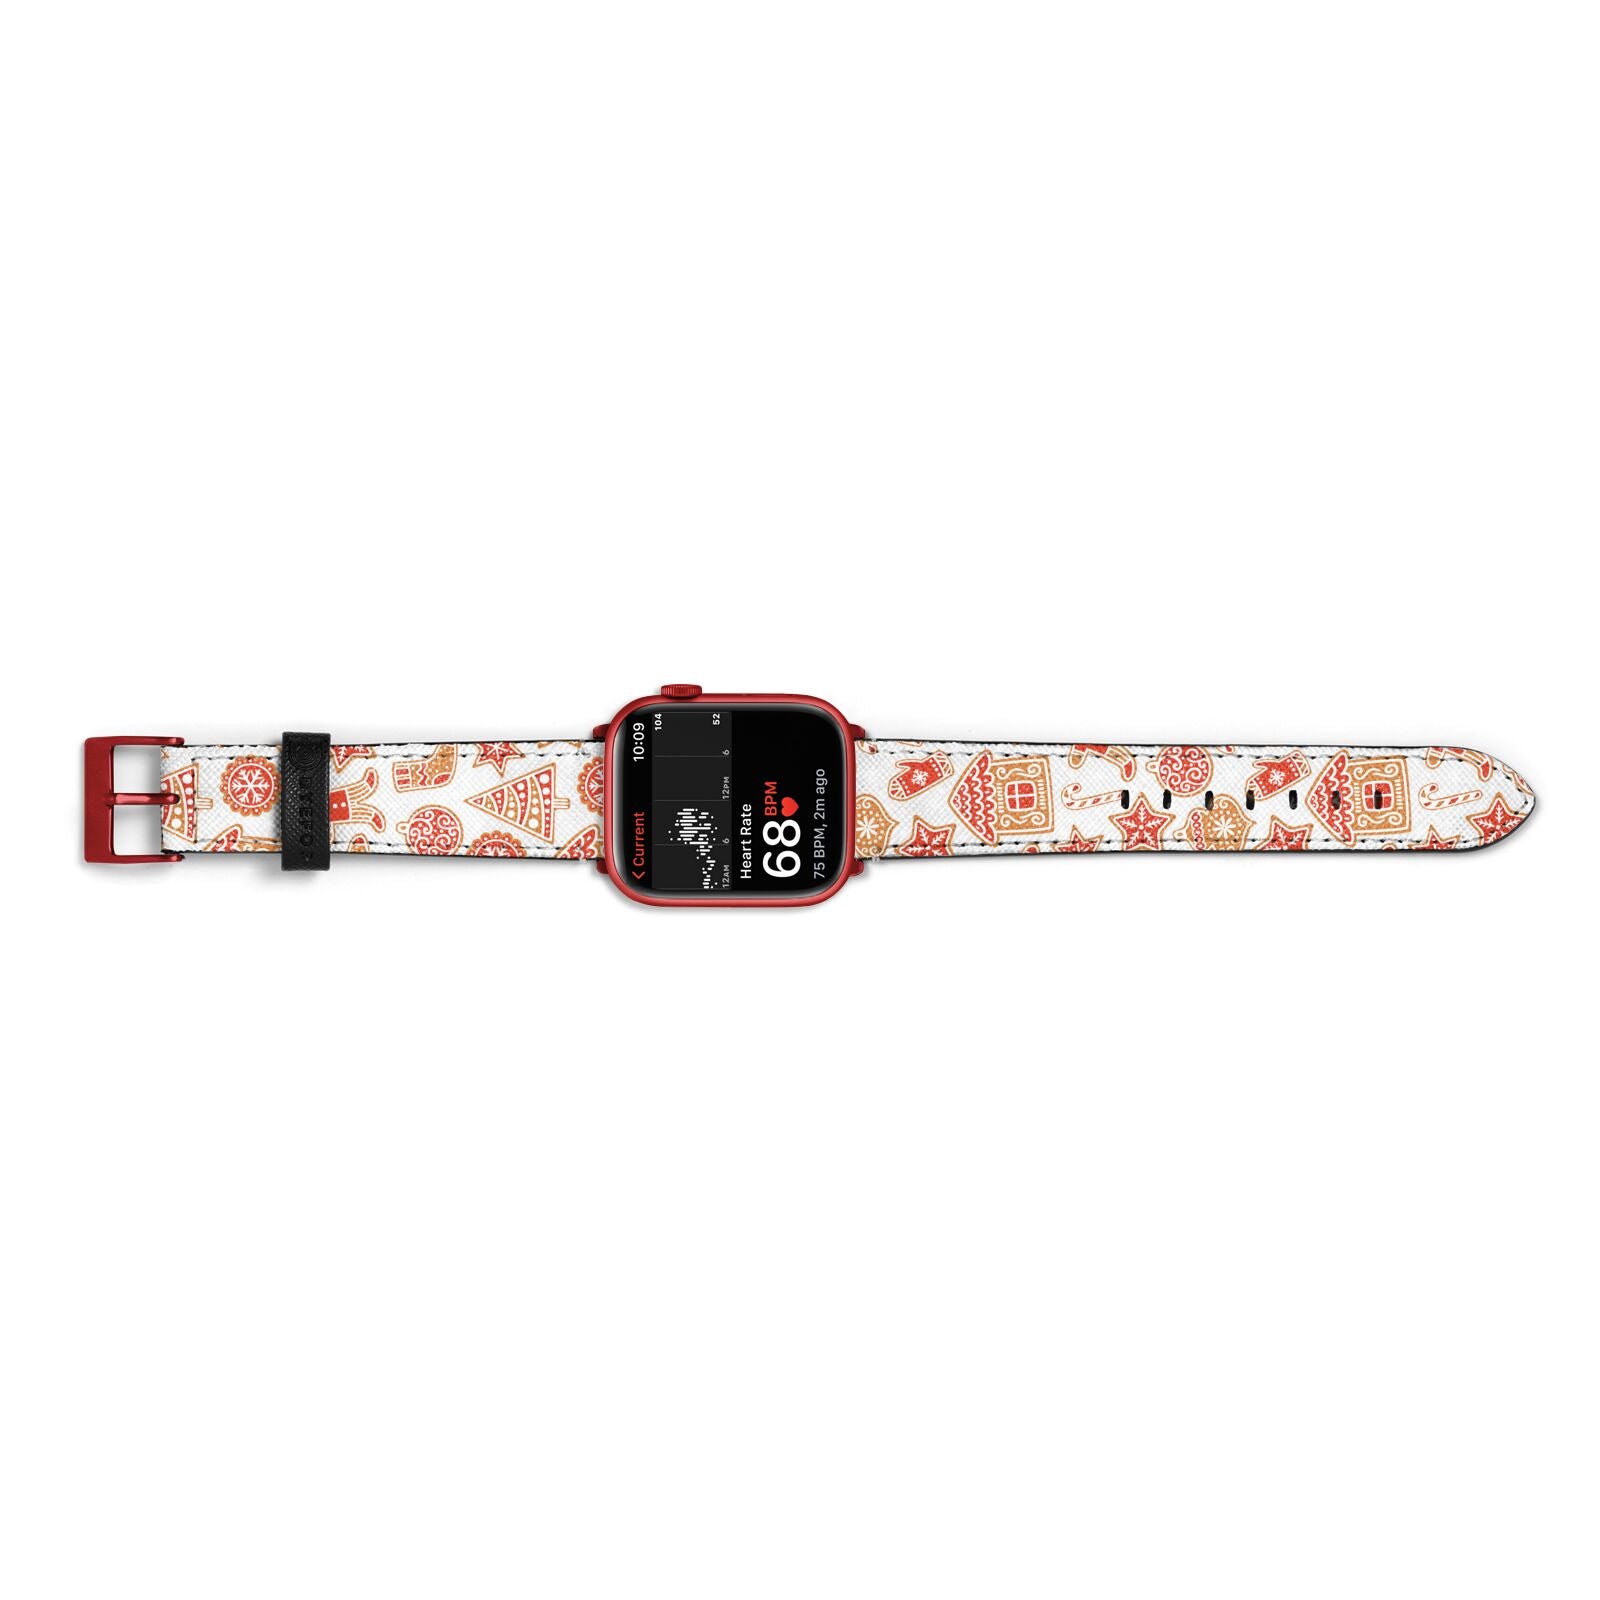 Christmas Gingerbread Apple Watch Strap Size 38mm Landscape Image Red Hardware